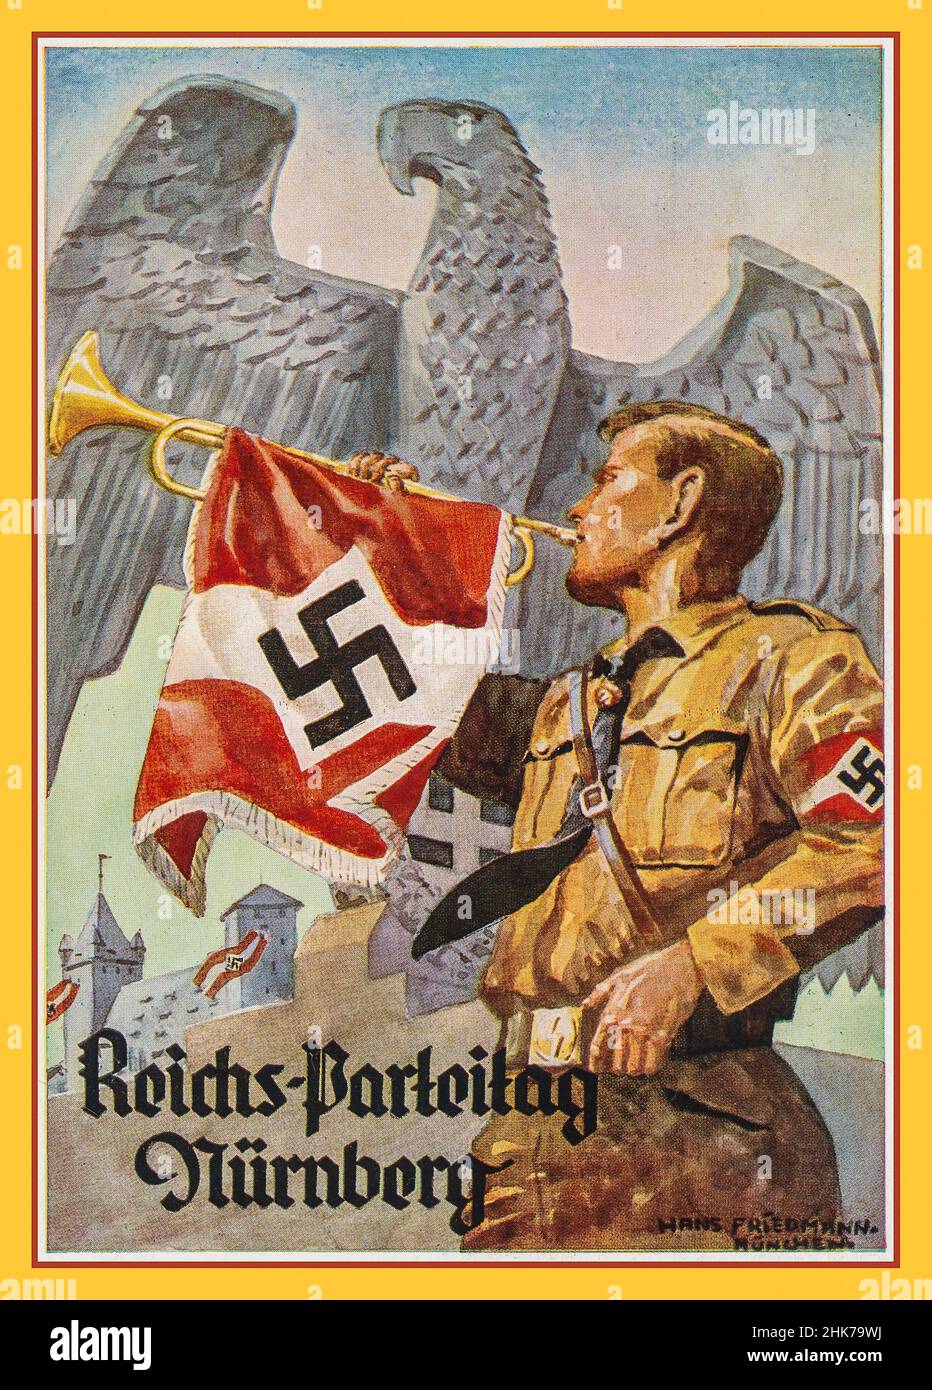 1930s Nazi Propaganda Card with Sturmabteilung Bugler wearing Swastika armband and displaying Swastika Flag at a Reichs-Parteitag Nurnberg Rally event, with German Eagle and Nurnberg castle behind Nazi Germany Propaganda Stock Photo